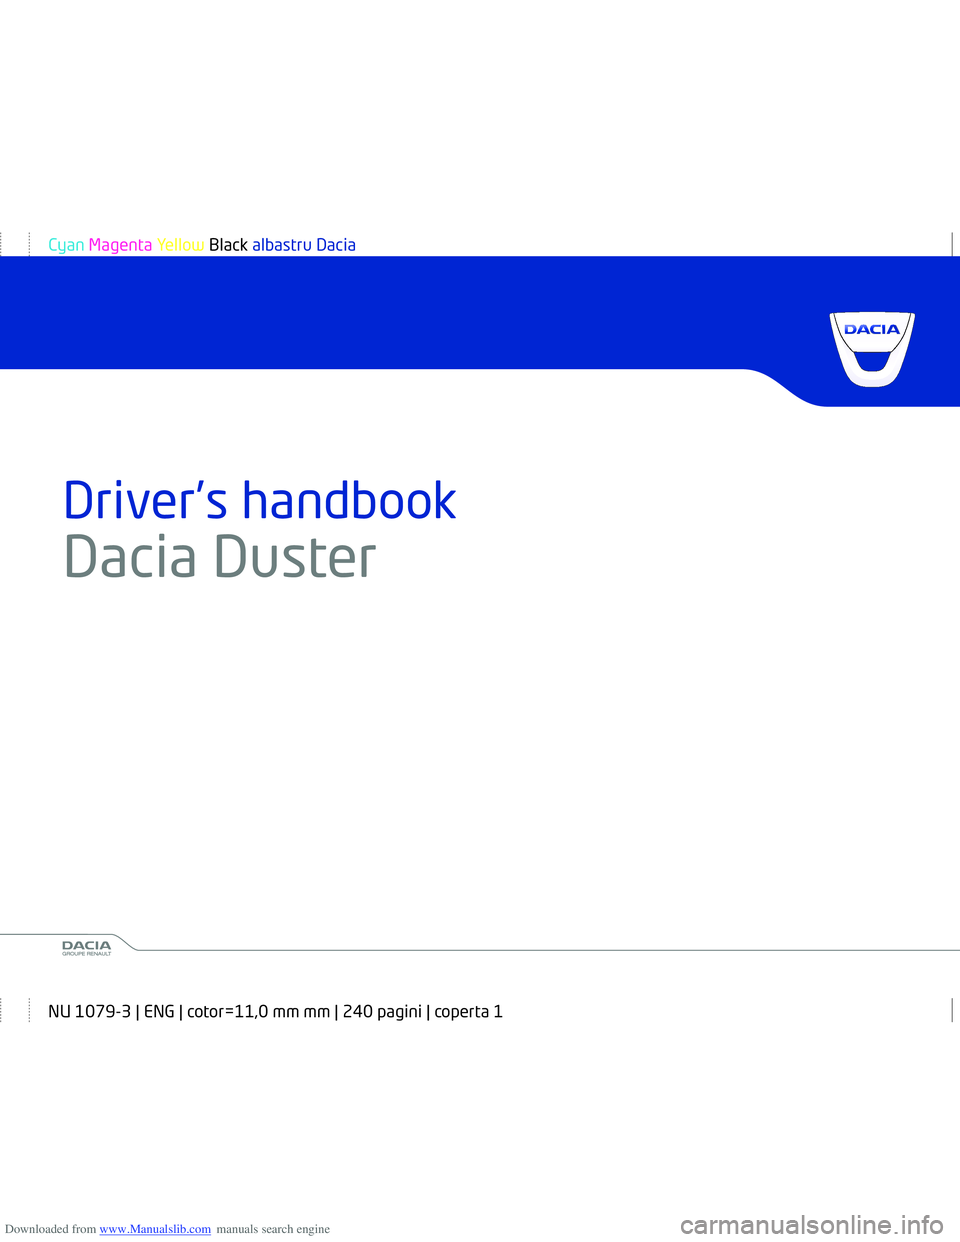 DACIA DUSTER 2019  Owners Manual Downloaded from www.Manualslib.com manuals search engine www.daciagroup.com
Driver’s handbook
Dacia  Duster        
Ref 999101781R / édition anglaiseNU 1079-3 - 07/2014
Cyan Magenta Yellow Black al